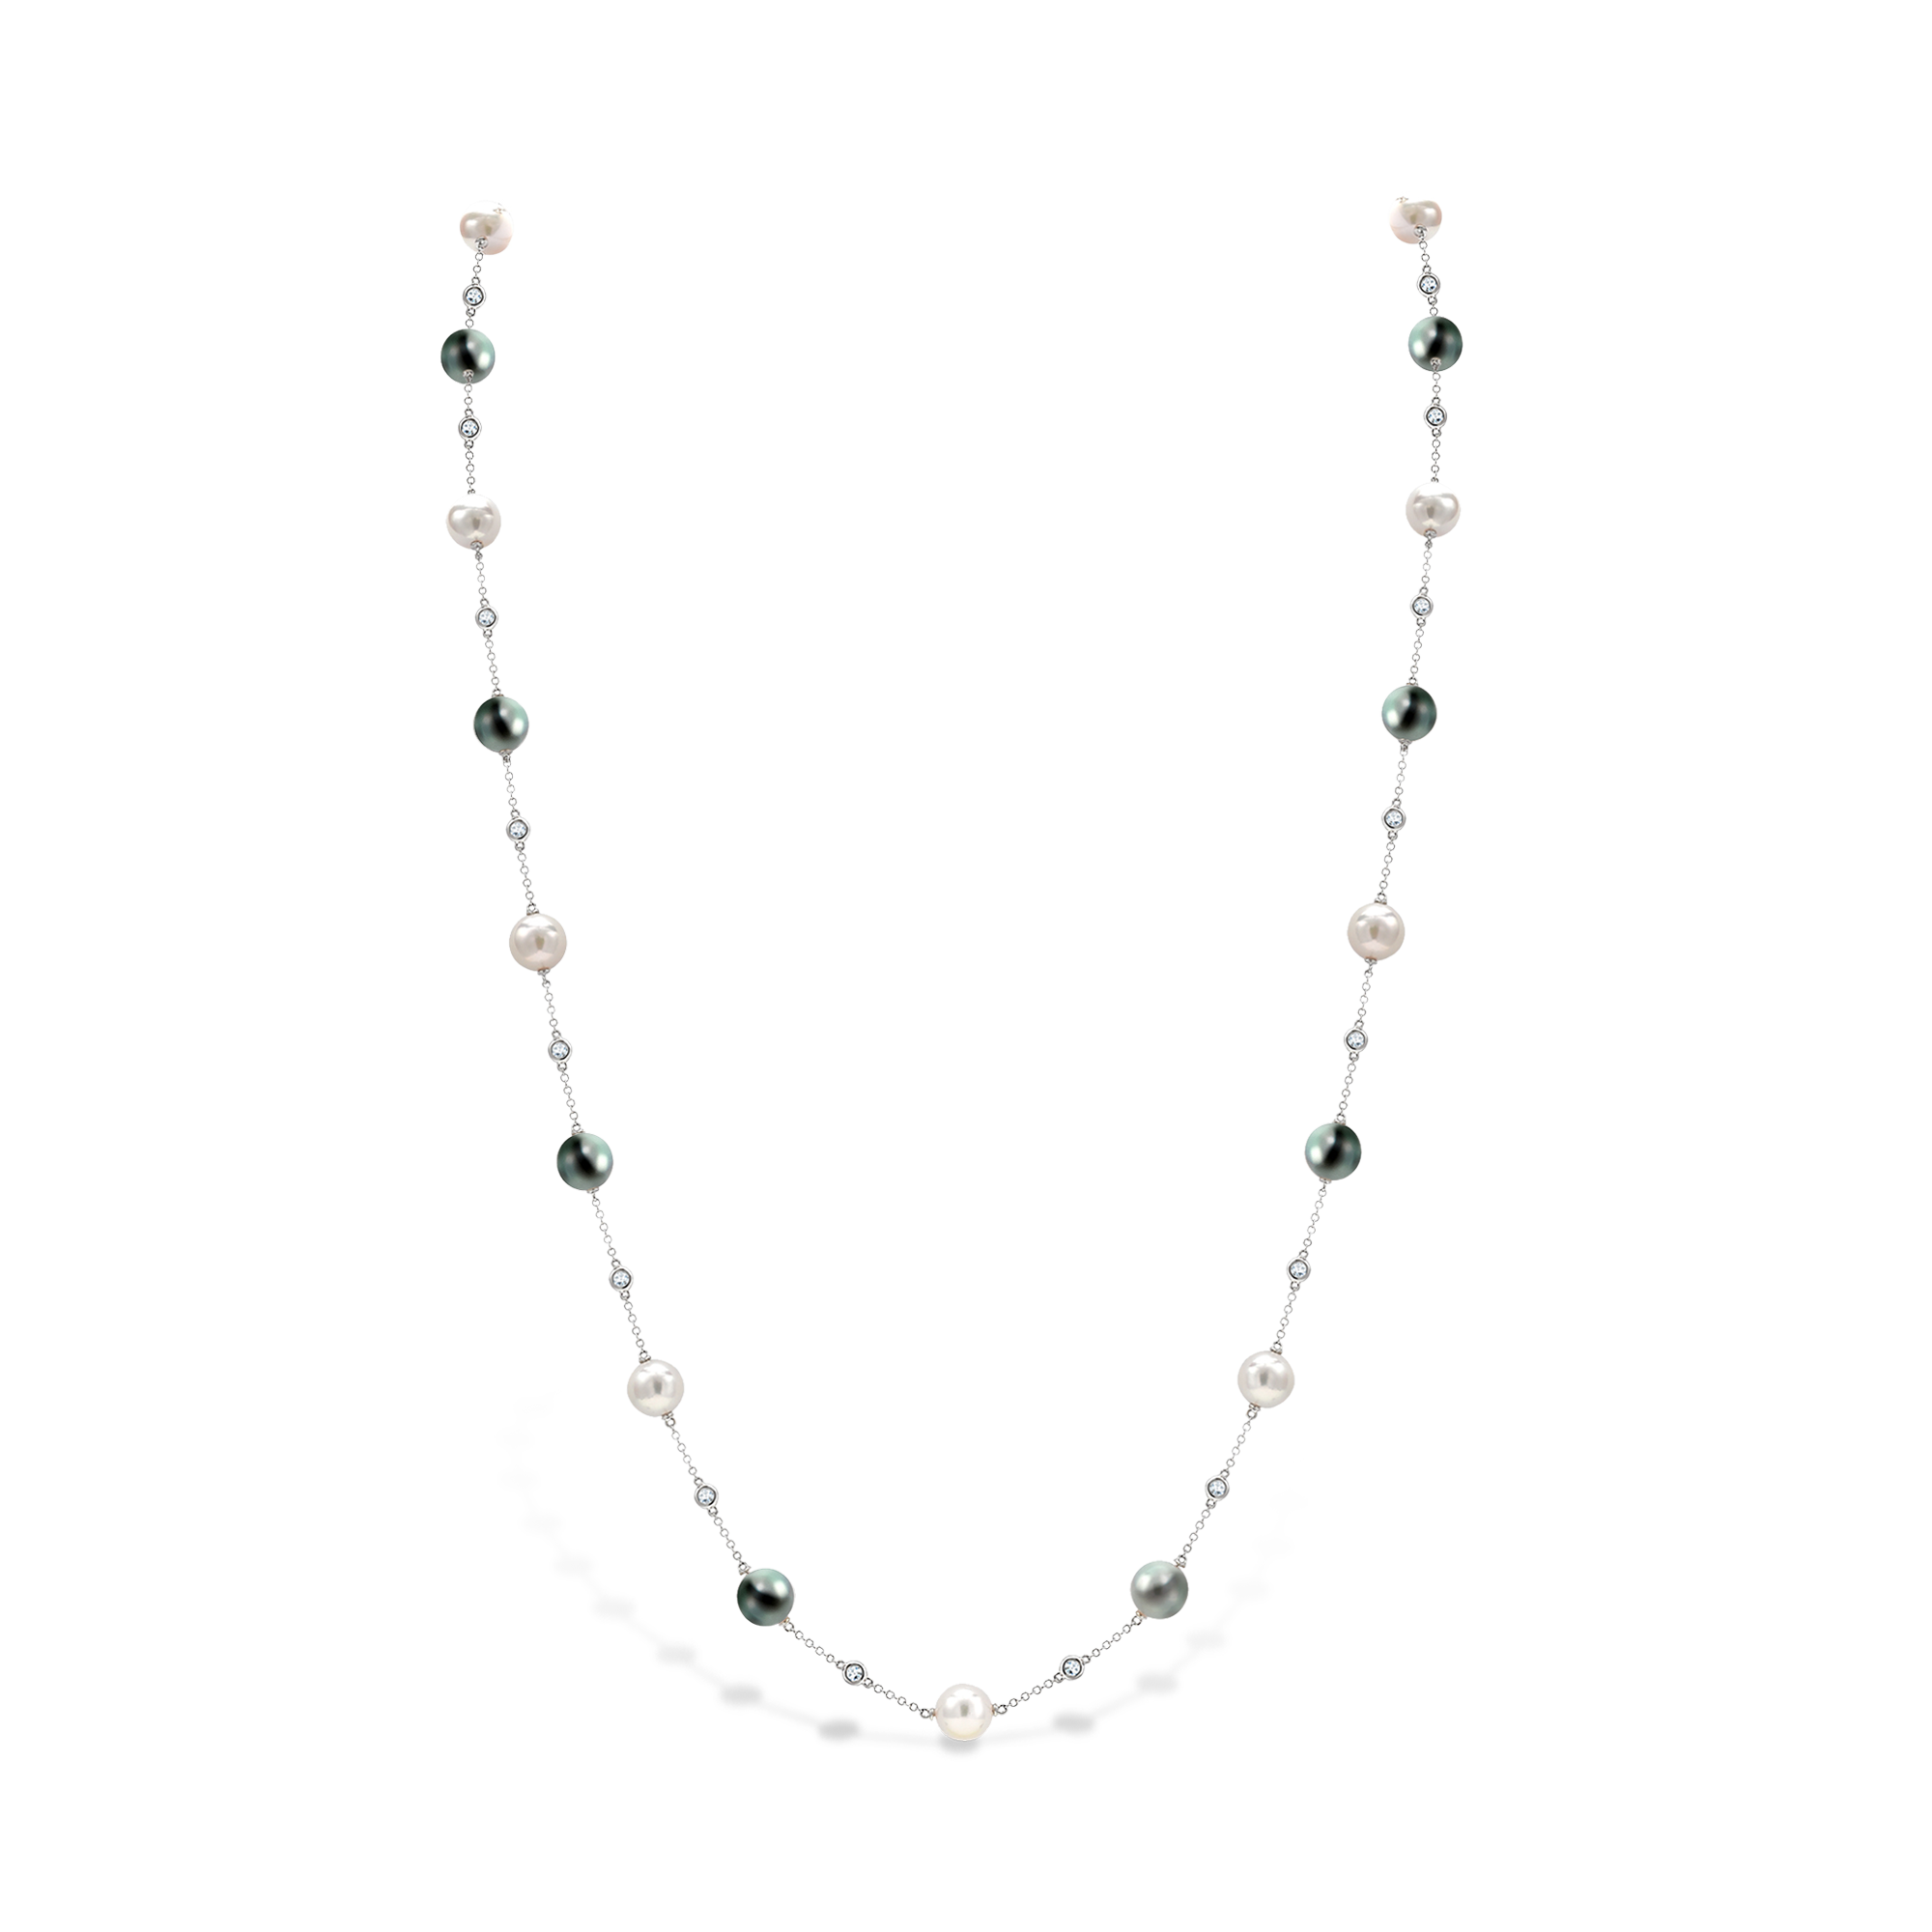 Akoya and Tahitian Pearl Necklace White Gold Chain with Spectacle Set Diamonds_1